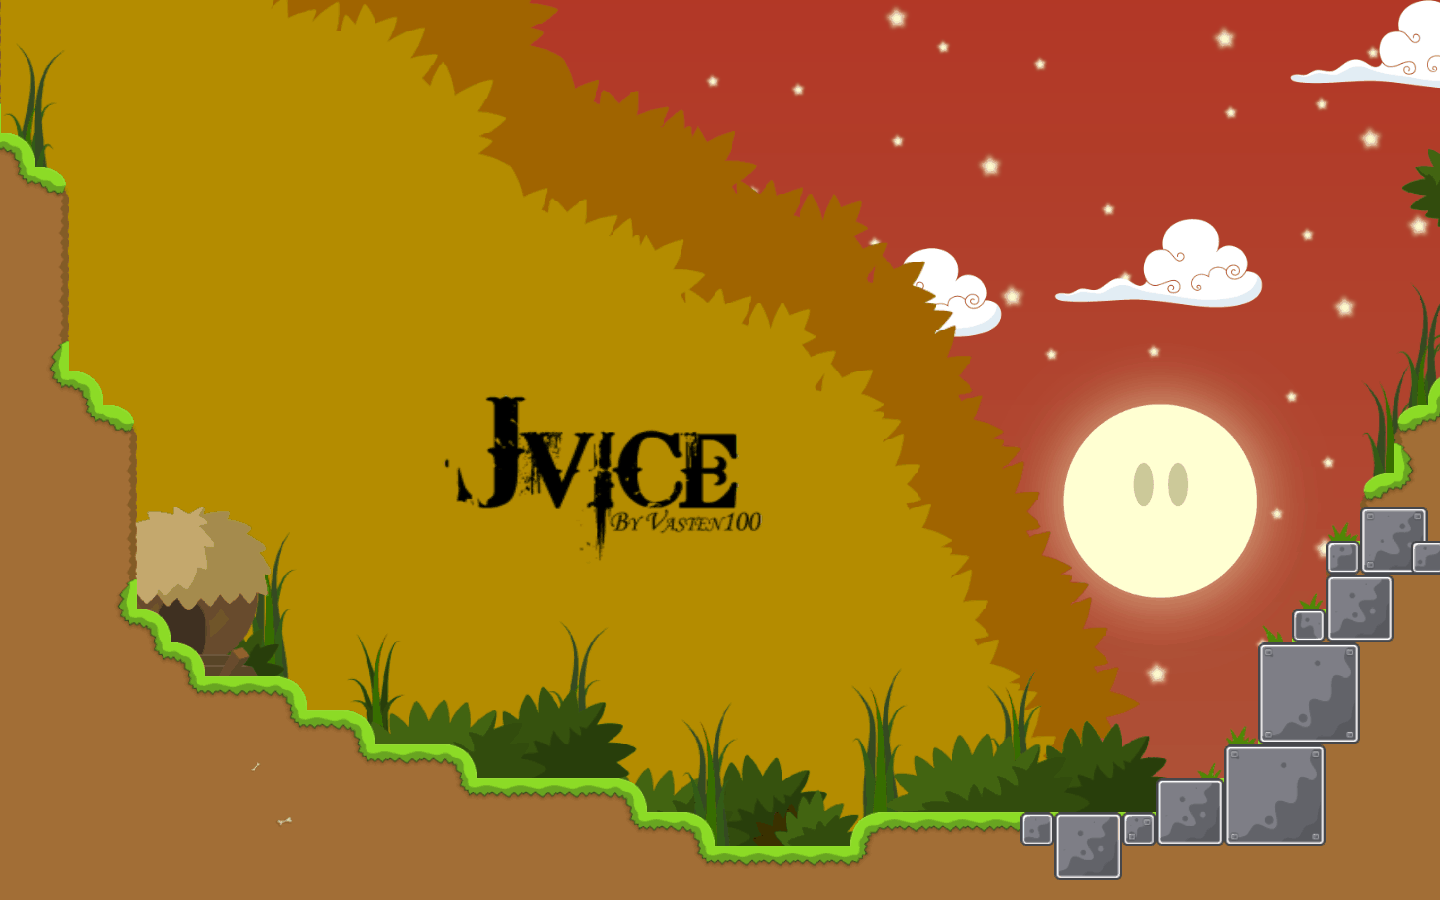 Jvice.png